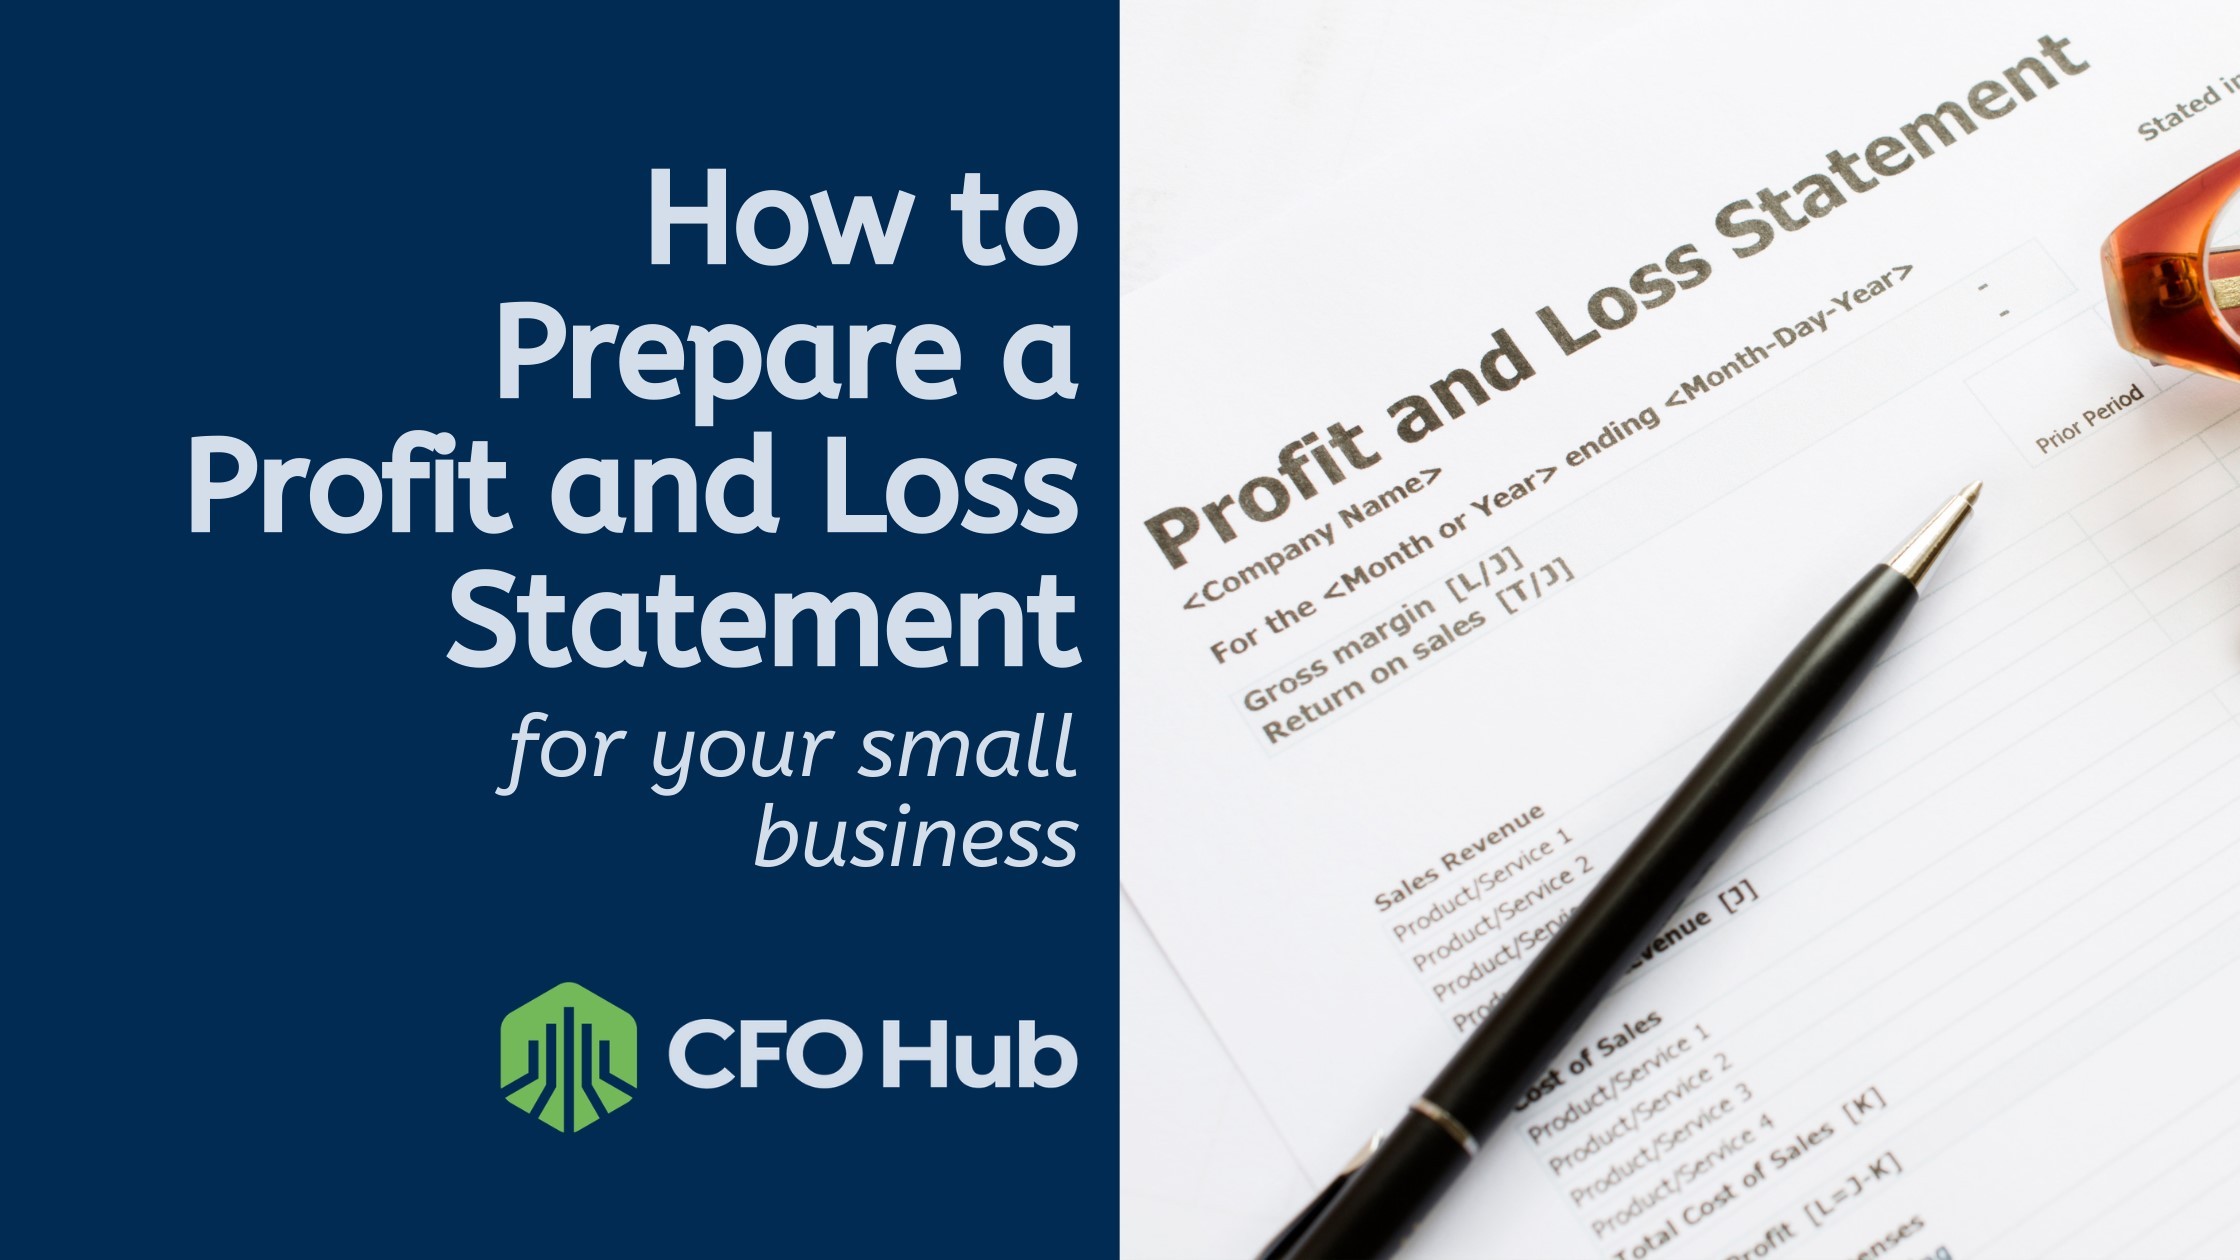 How to prepare a profit and loss statement